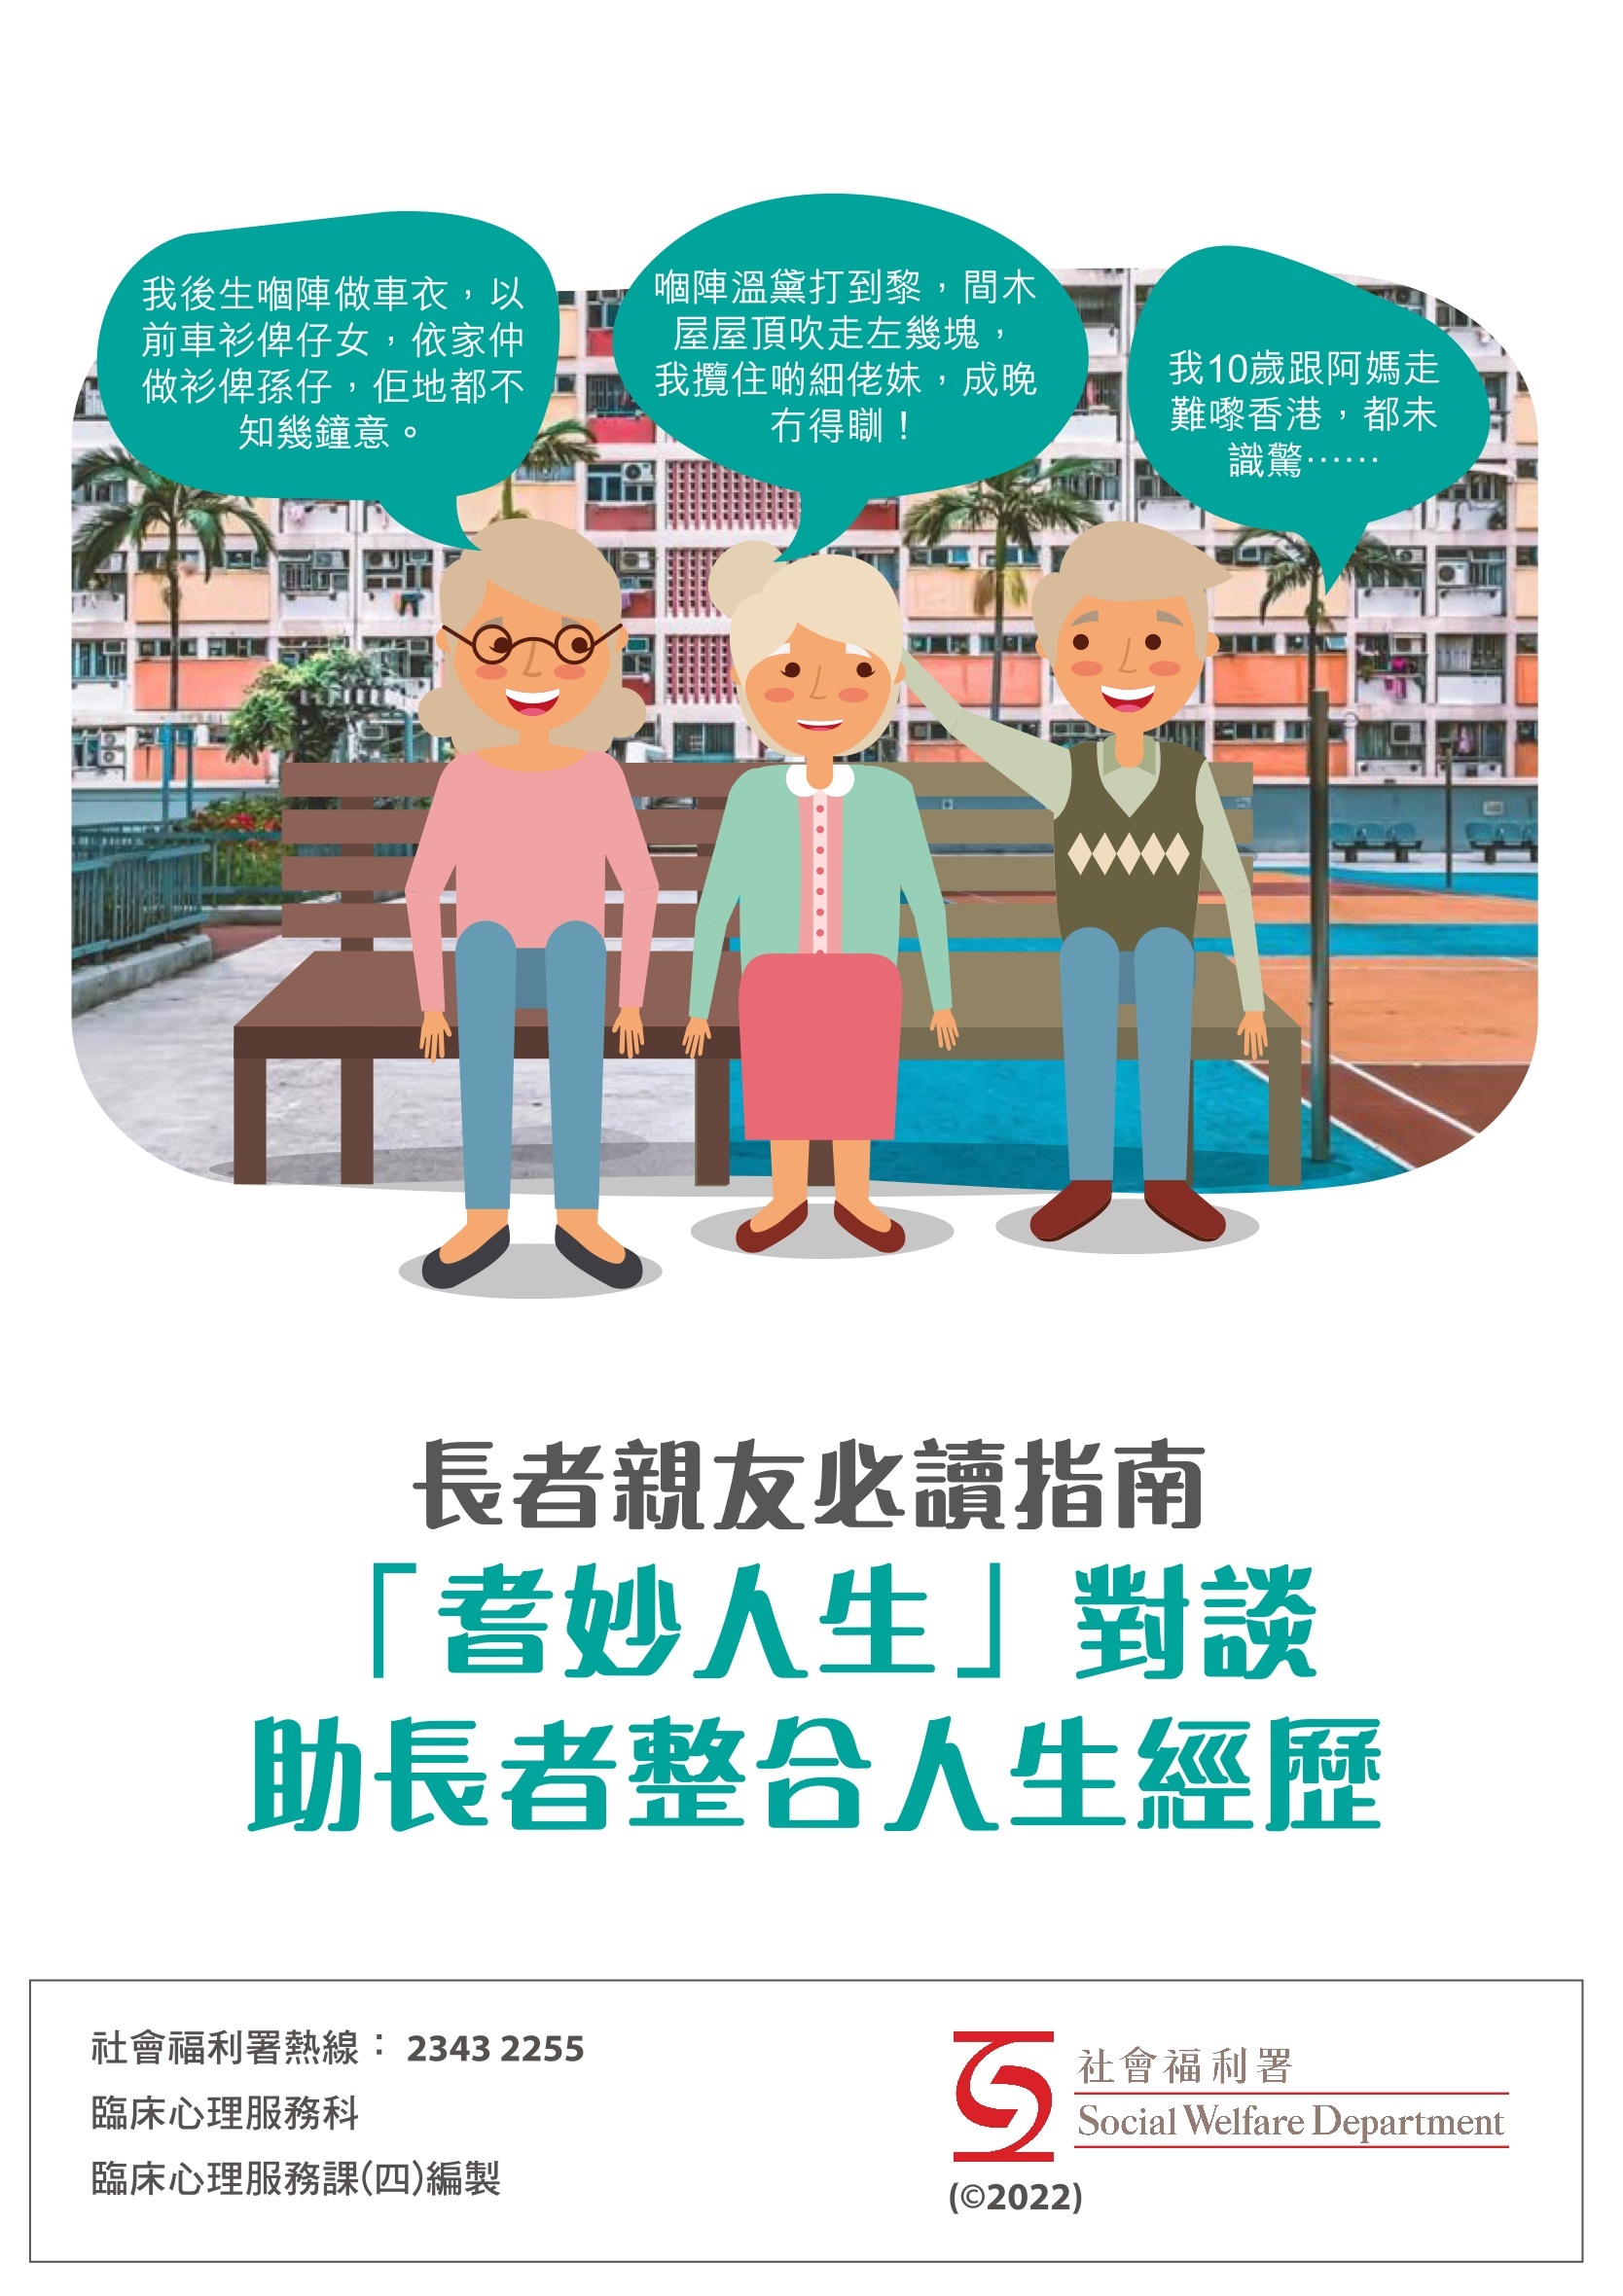 Life Review Conversations with Elderly
                (Chinese Version Only)